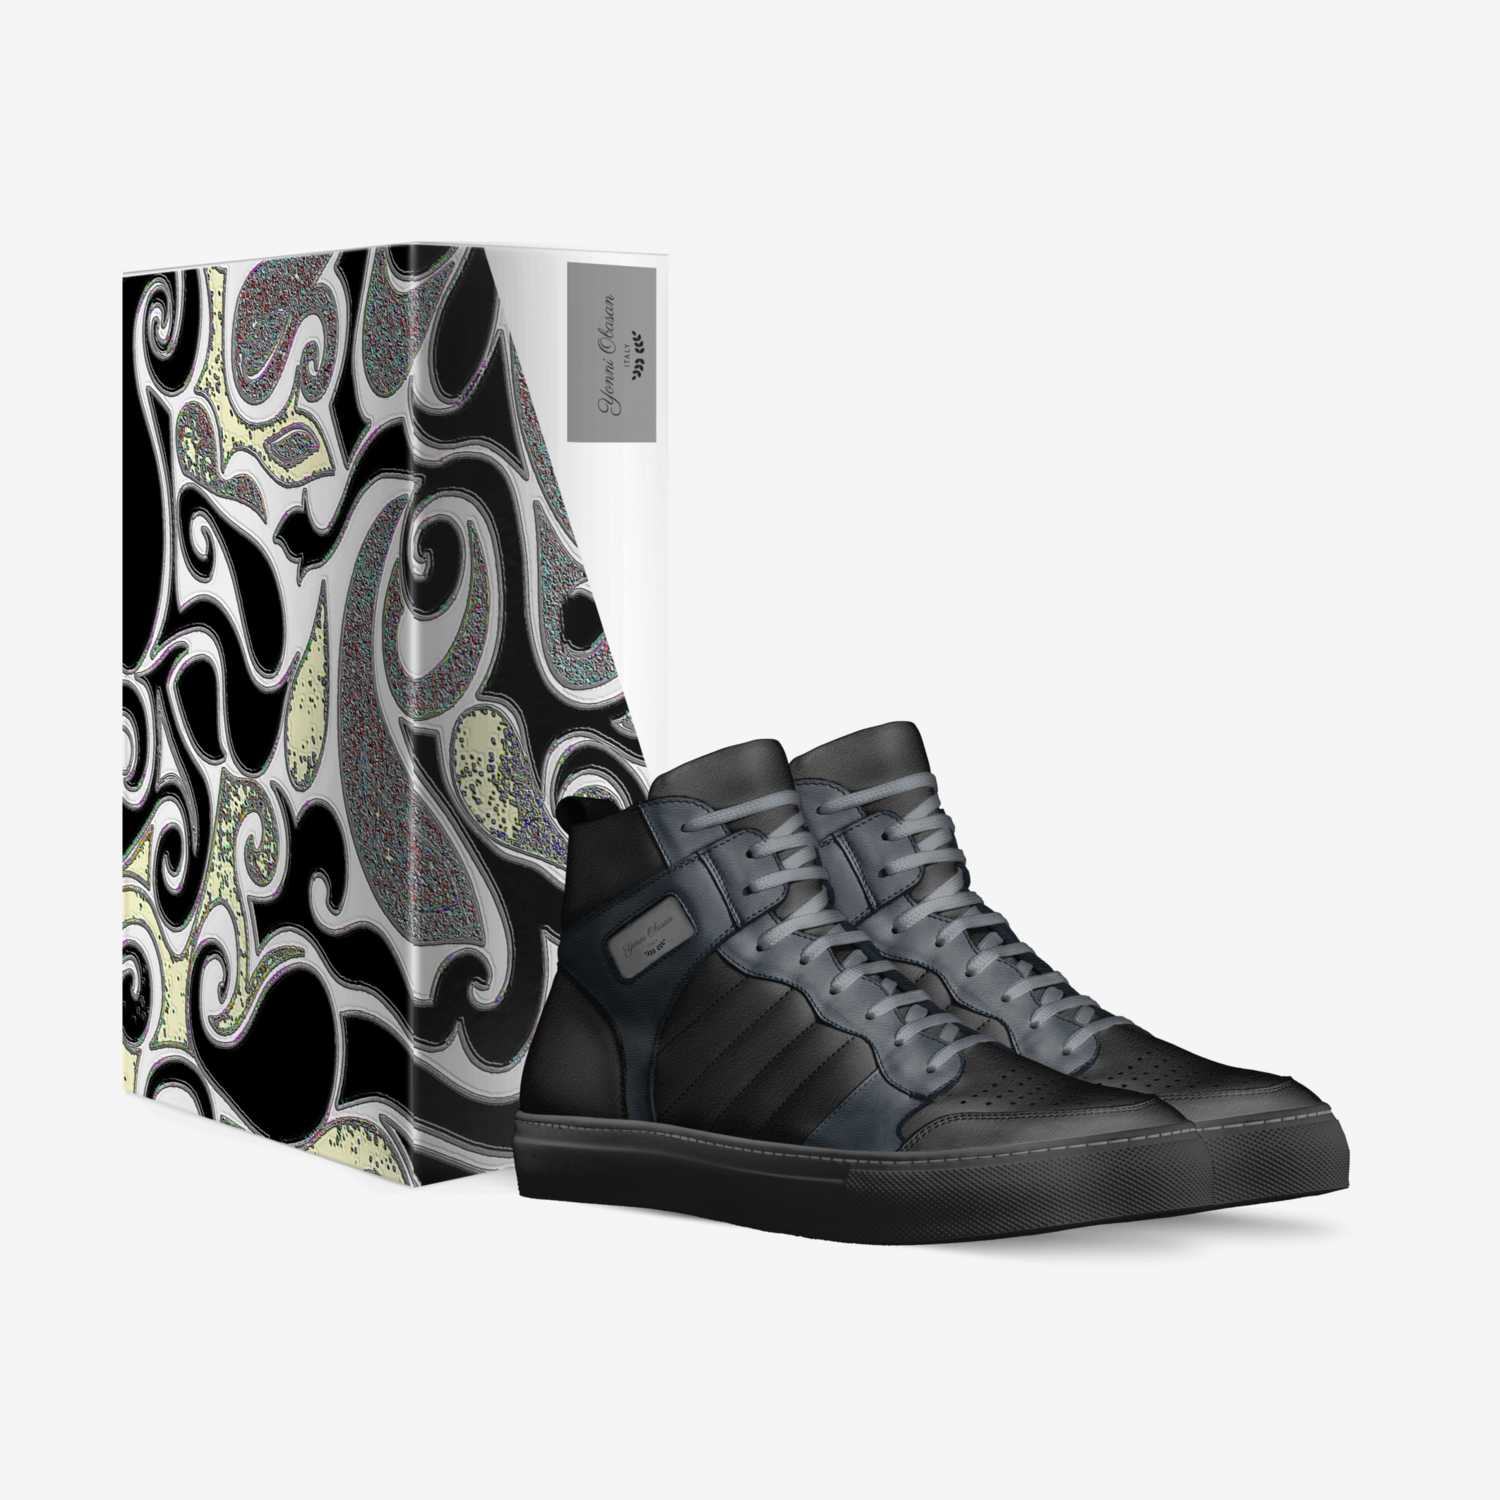 Back in Black custom made in Italy shoes by Yonni Obasan | Box view